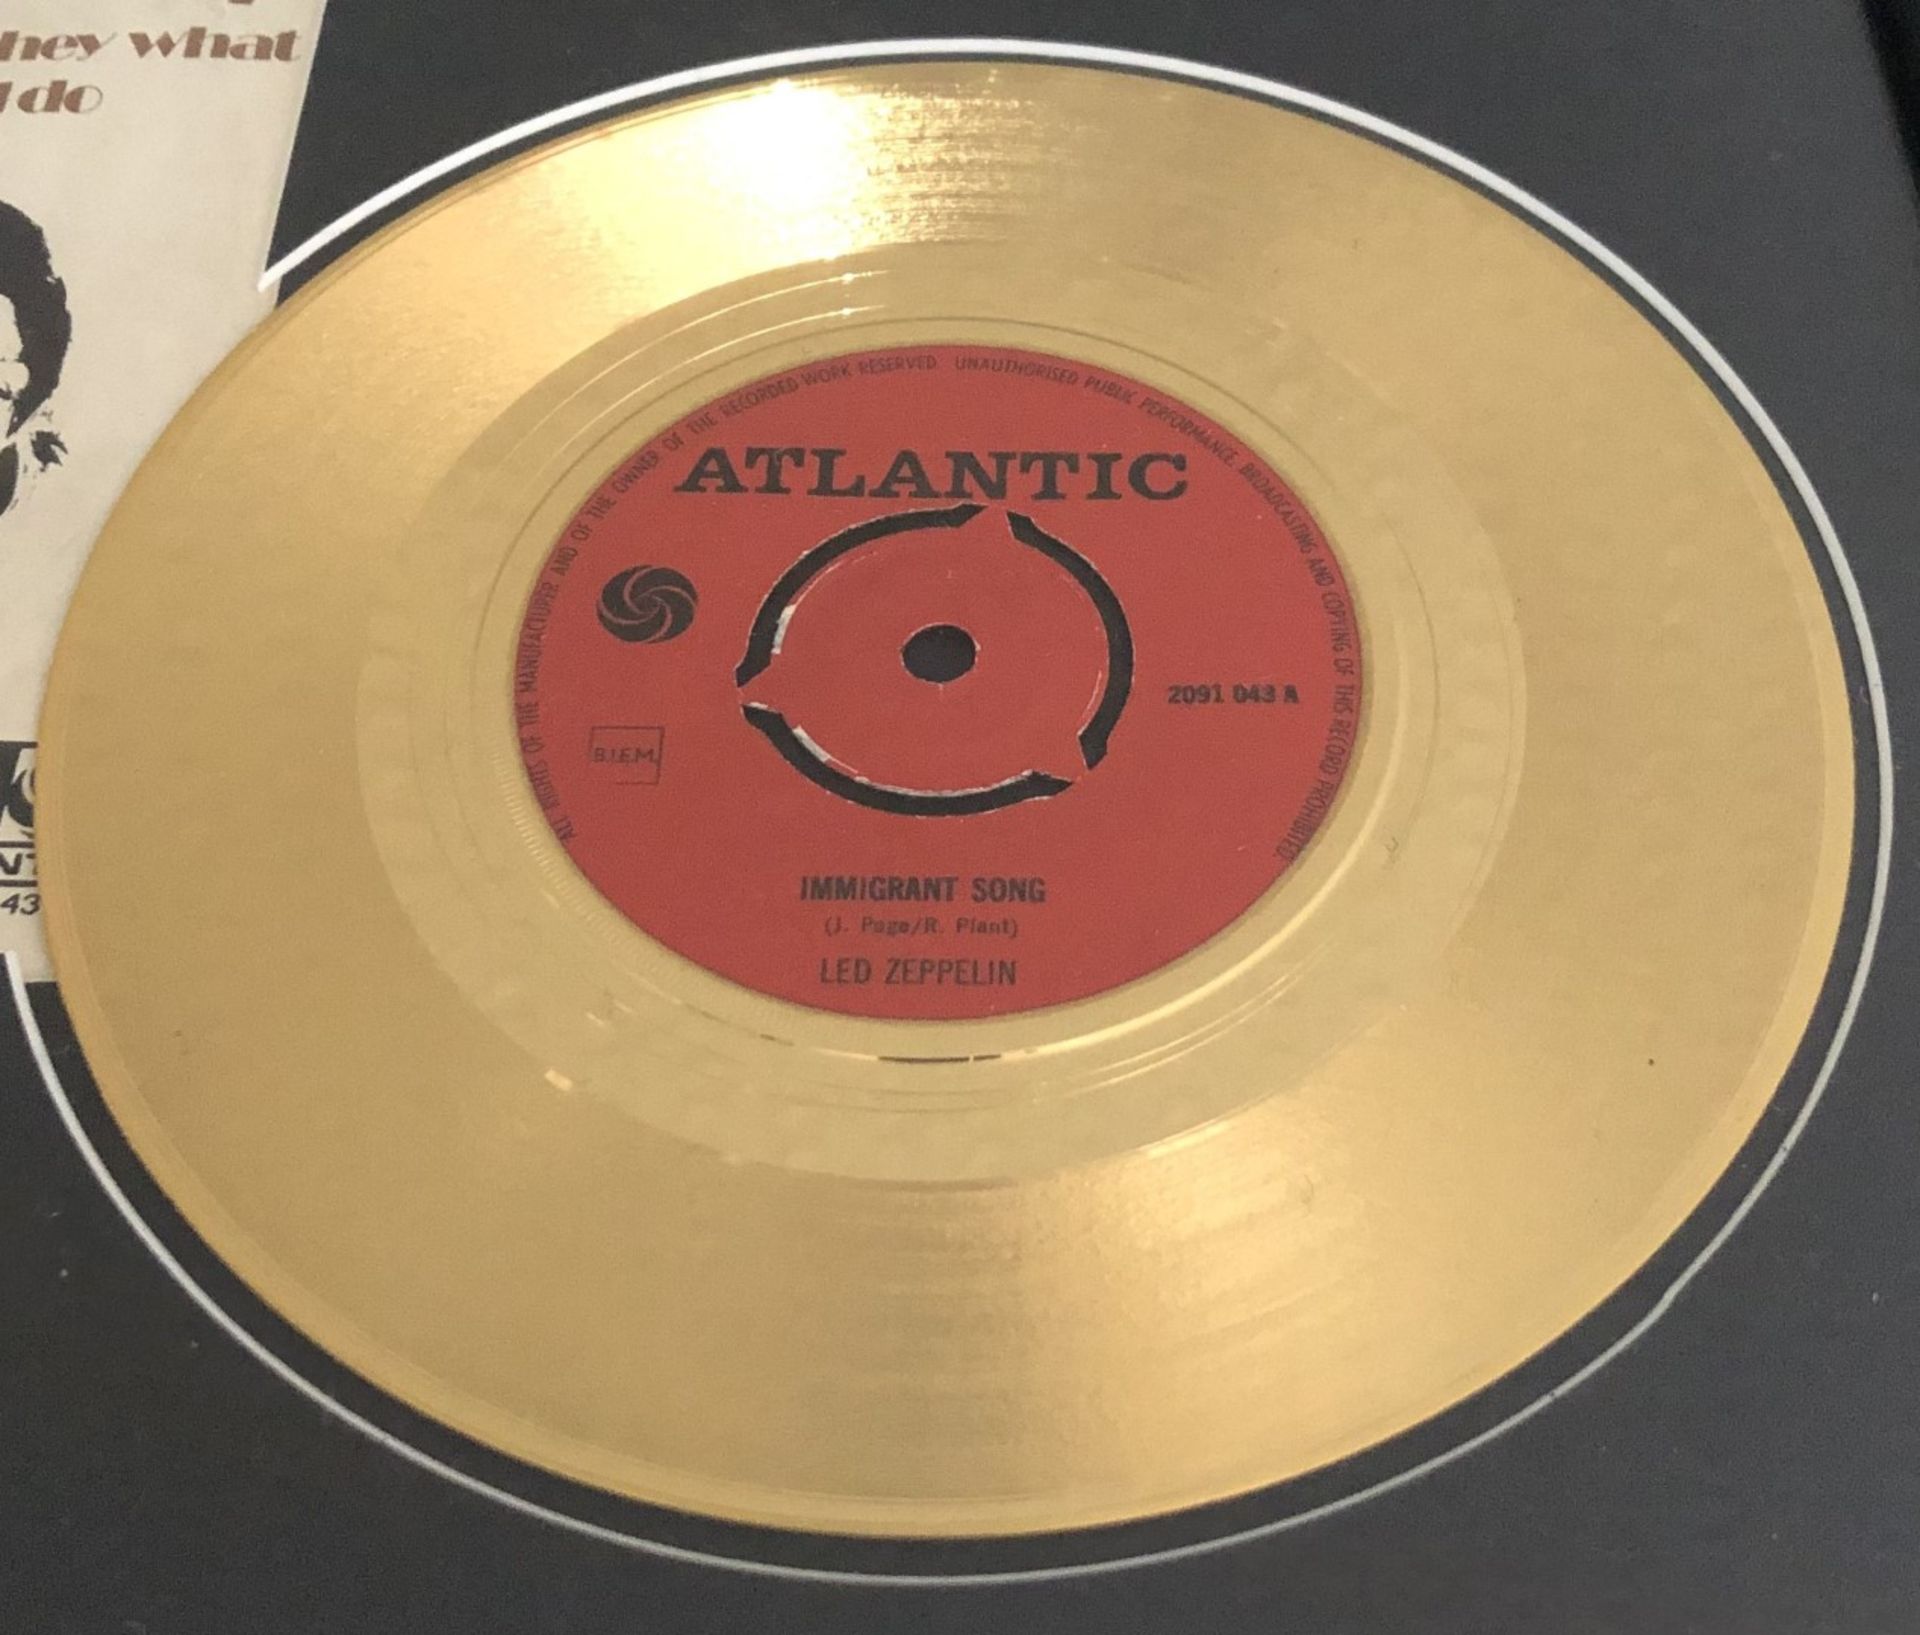 1 x 24 Carat Gold Coated 7 Inch Vinyl Record - LED ZEPPELIN IMMIGRANT SONG - Mounted and Presented - Image 3 of 5